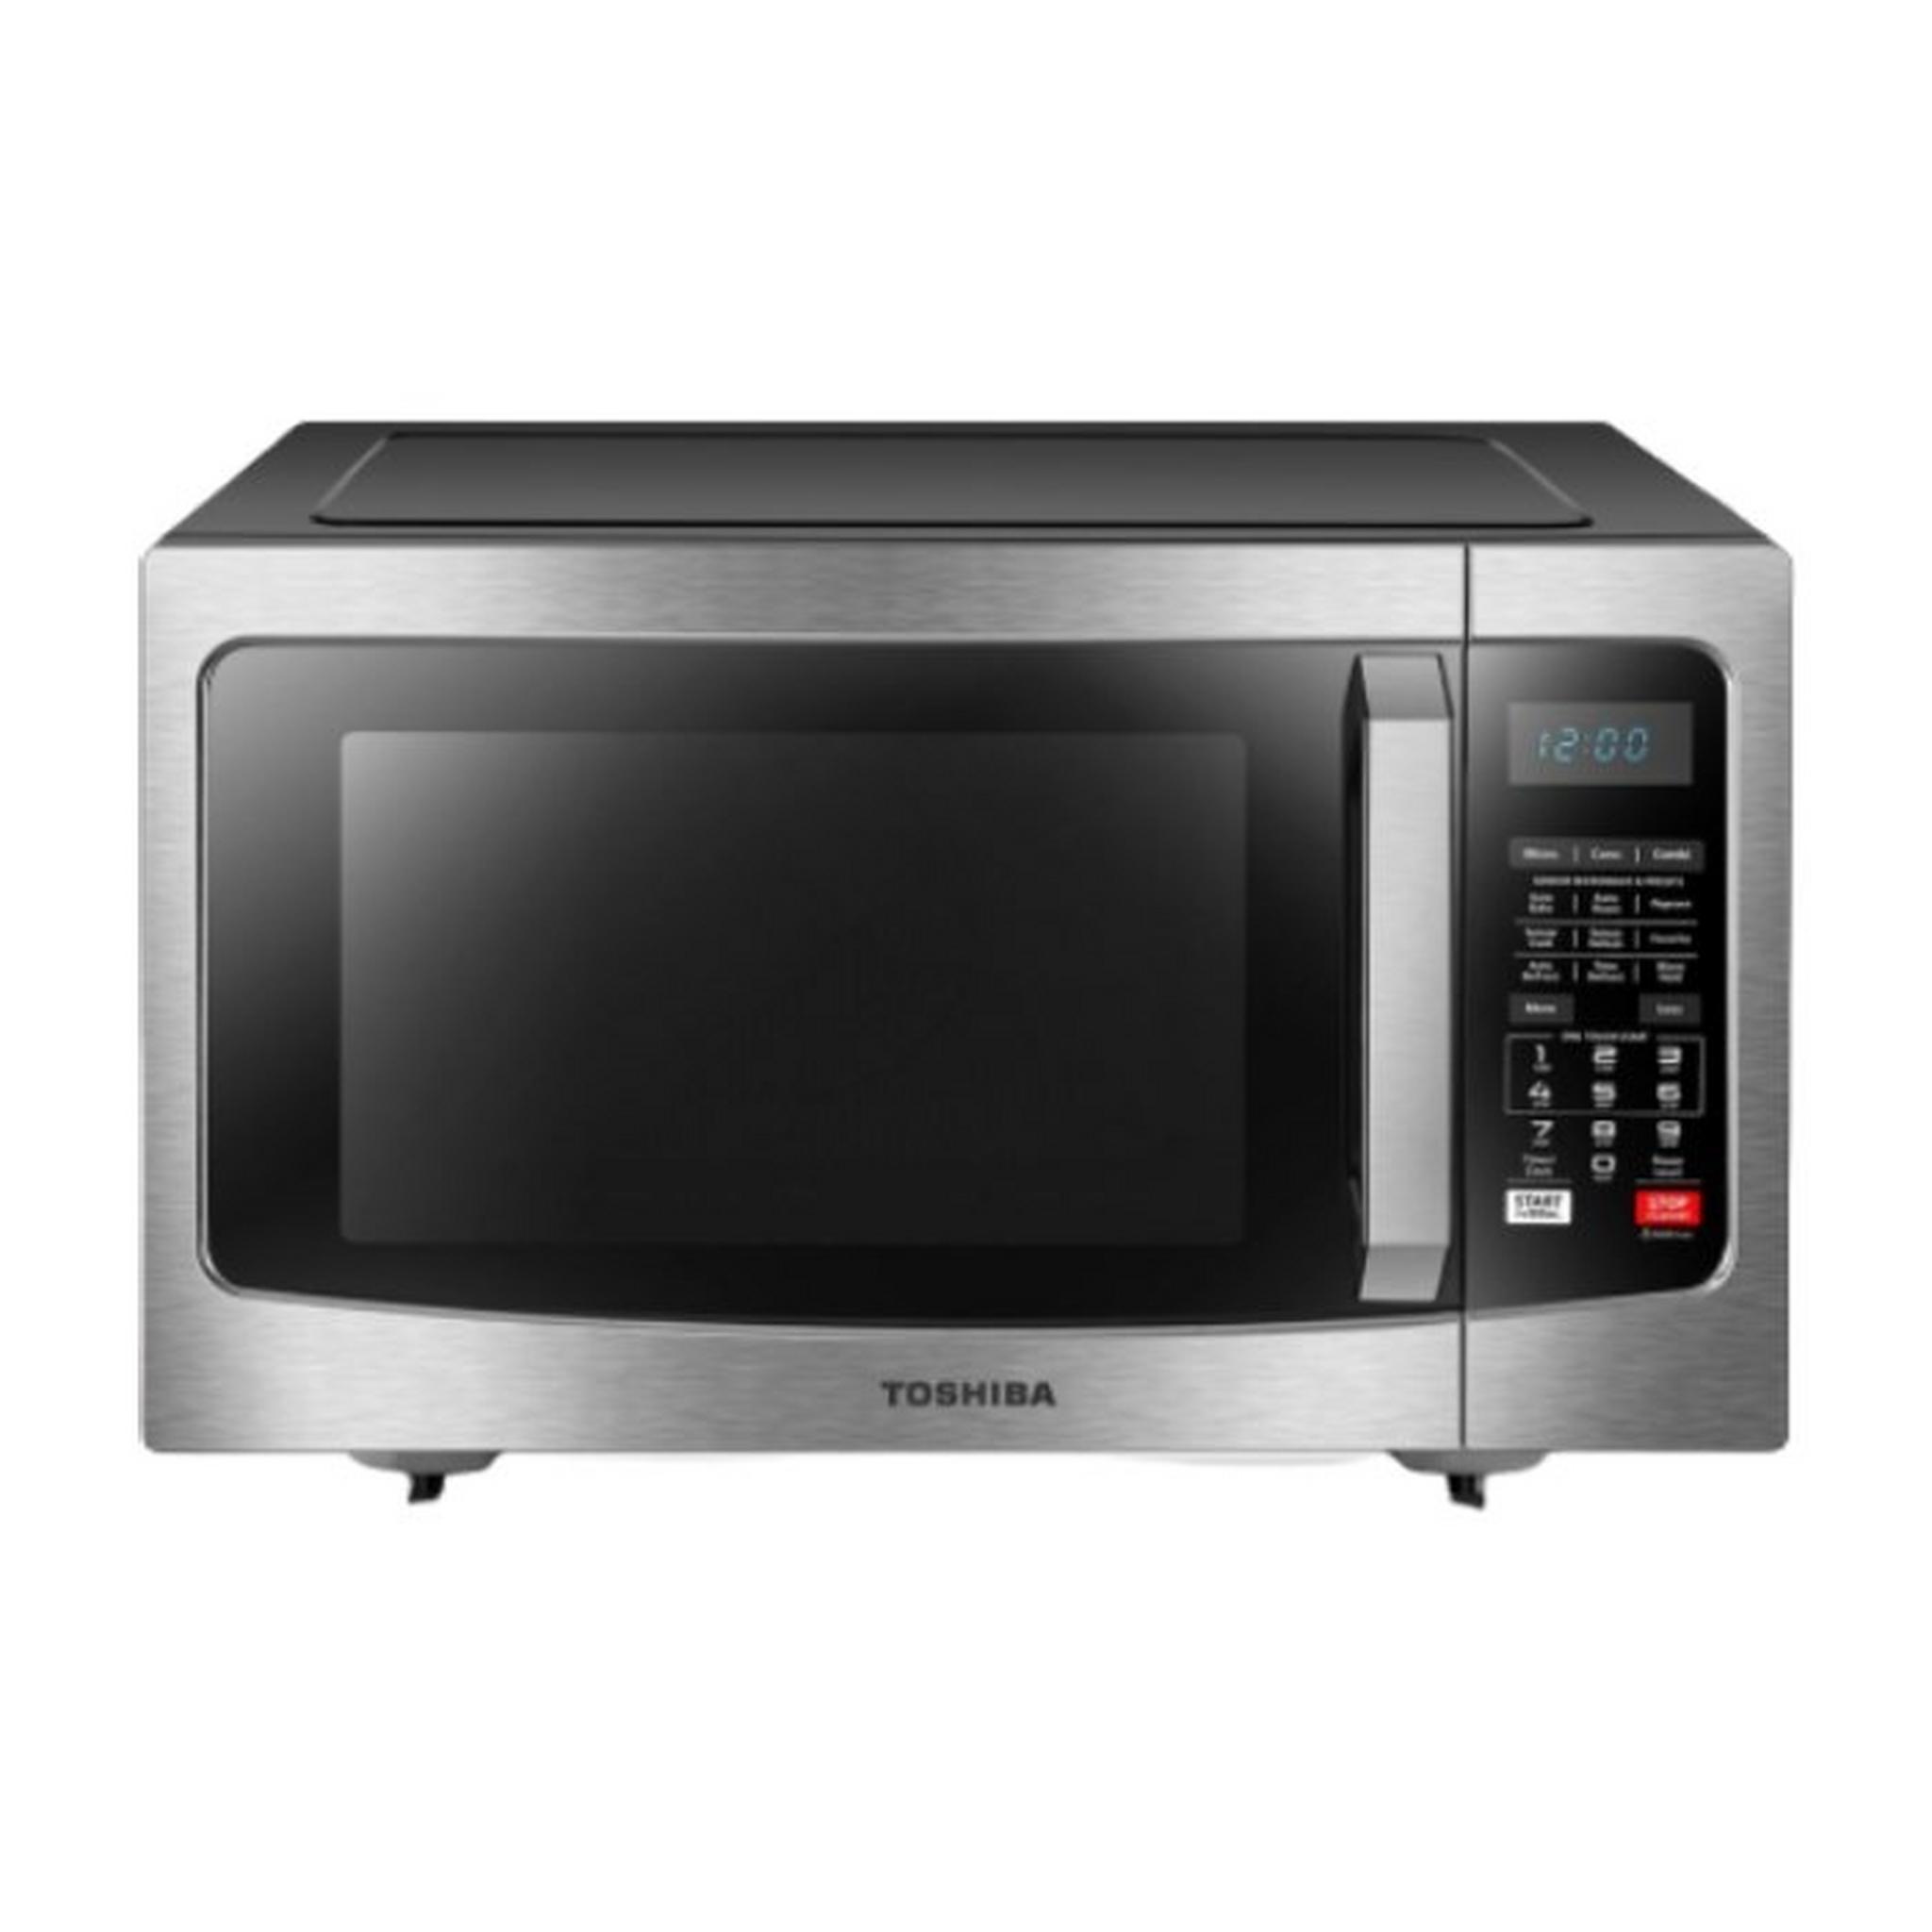 Toshiba Convection Microwave Oven, 42 L, ML-EC42S - Silver